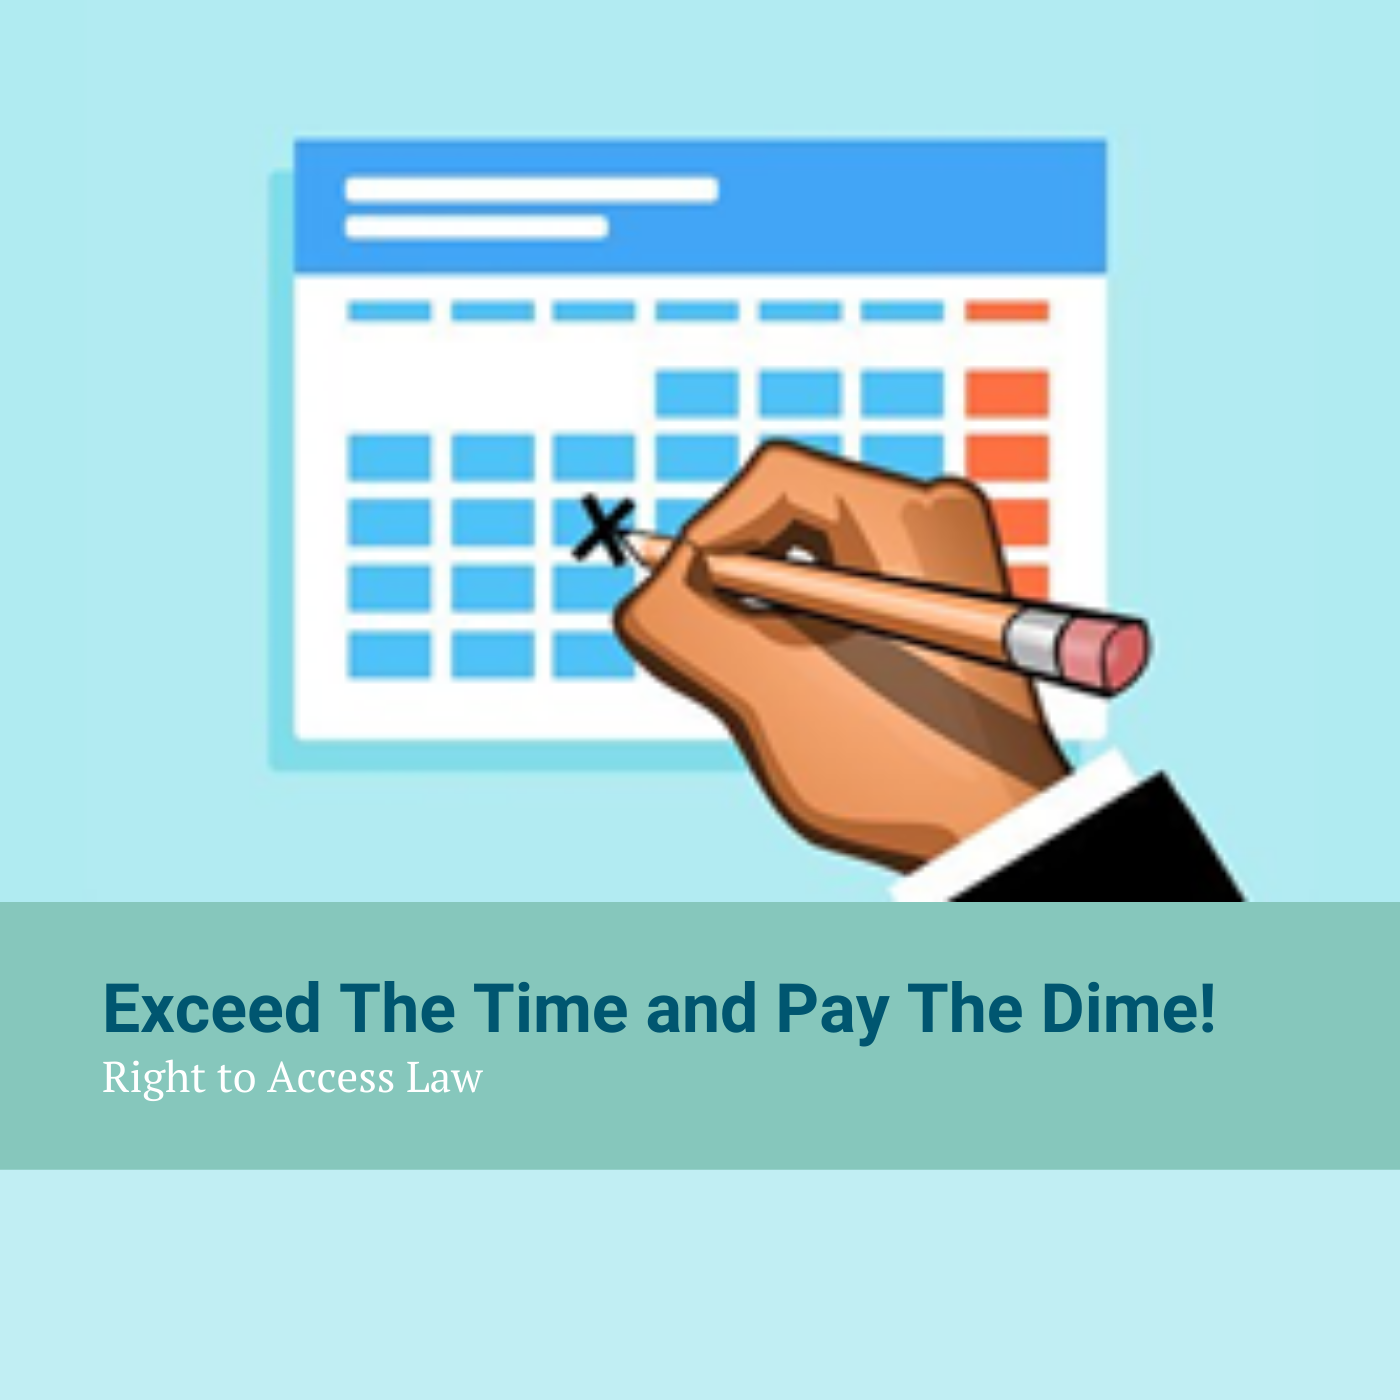 Exceed The Time and Pay The Dime! Right to Access Law Image